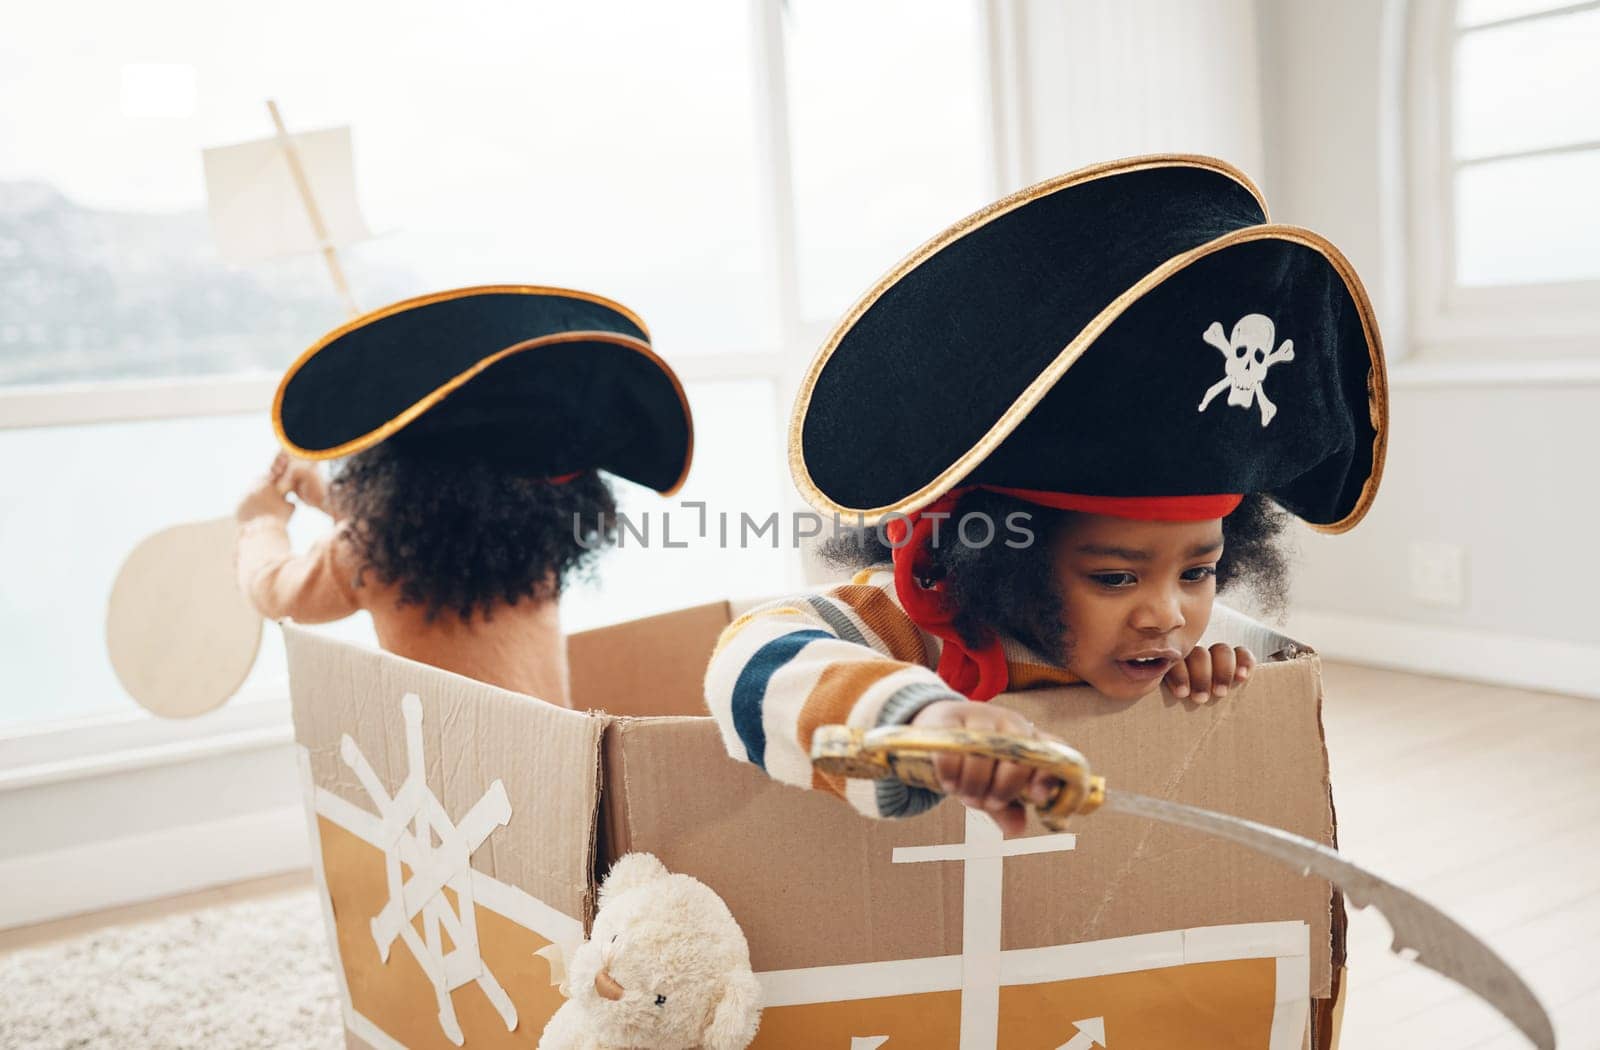 Playing, box ship and pirate children role play, fantasy imagine or pretend in cardboard container. Creative boat, fun home game or sailing black kids on Halloween cruise adventure with yacht captain.